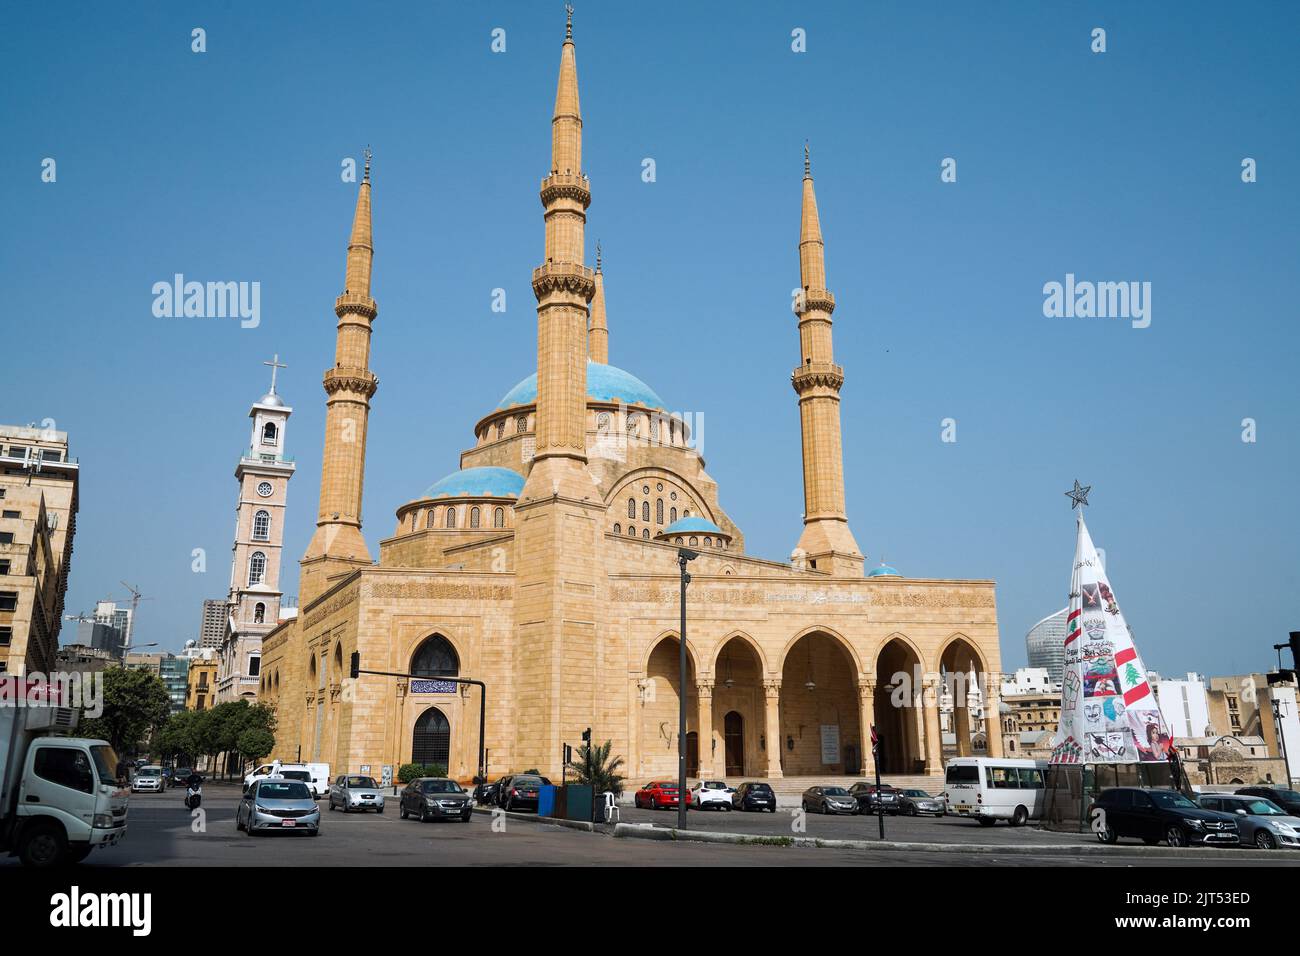 Beirut, Lebanon : Mohammad Al-Amin Sunni Muslim Mosque (also known as the Blue Mosque) and the bell tower of St George's Cathedral in Martyrs' Square, downtown Beirut, Lebanon Stock Photo